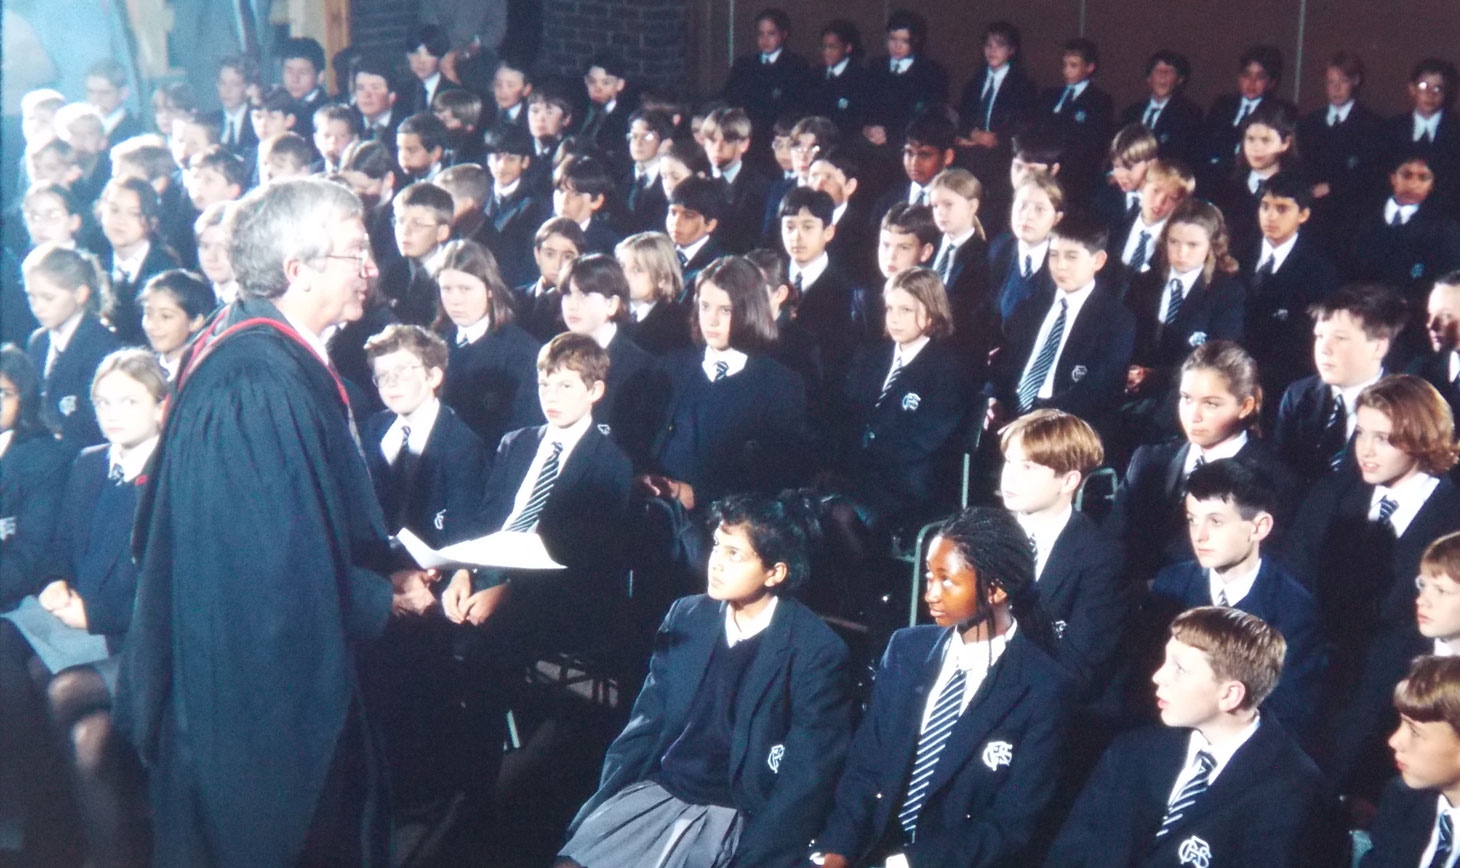 1996 and an assembly by the then new Headmaster, Paul Dixon